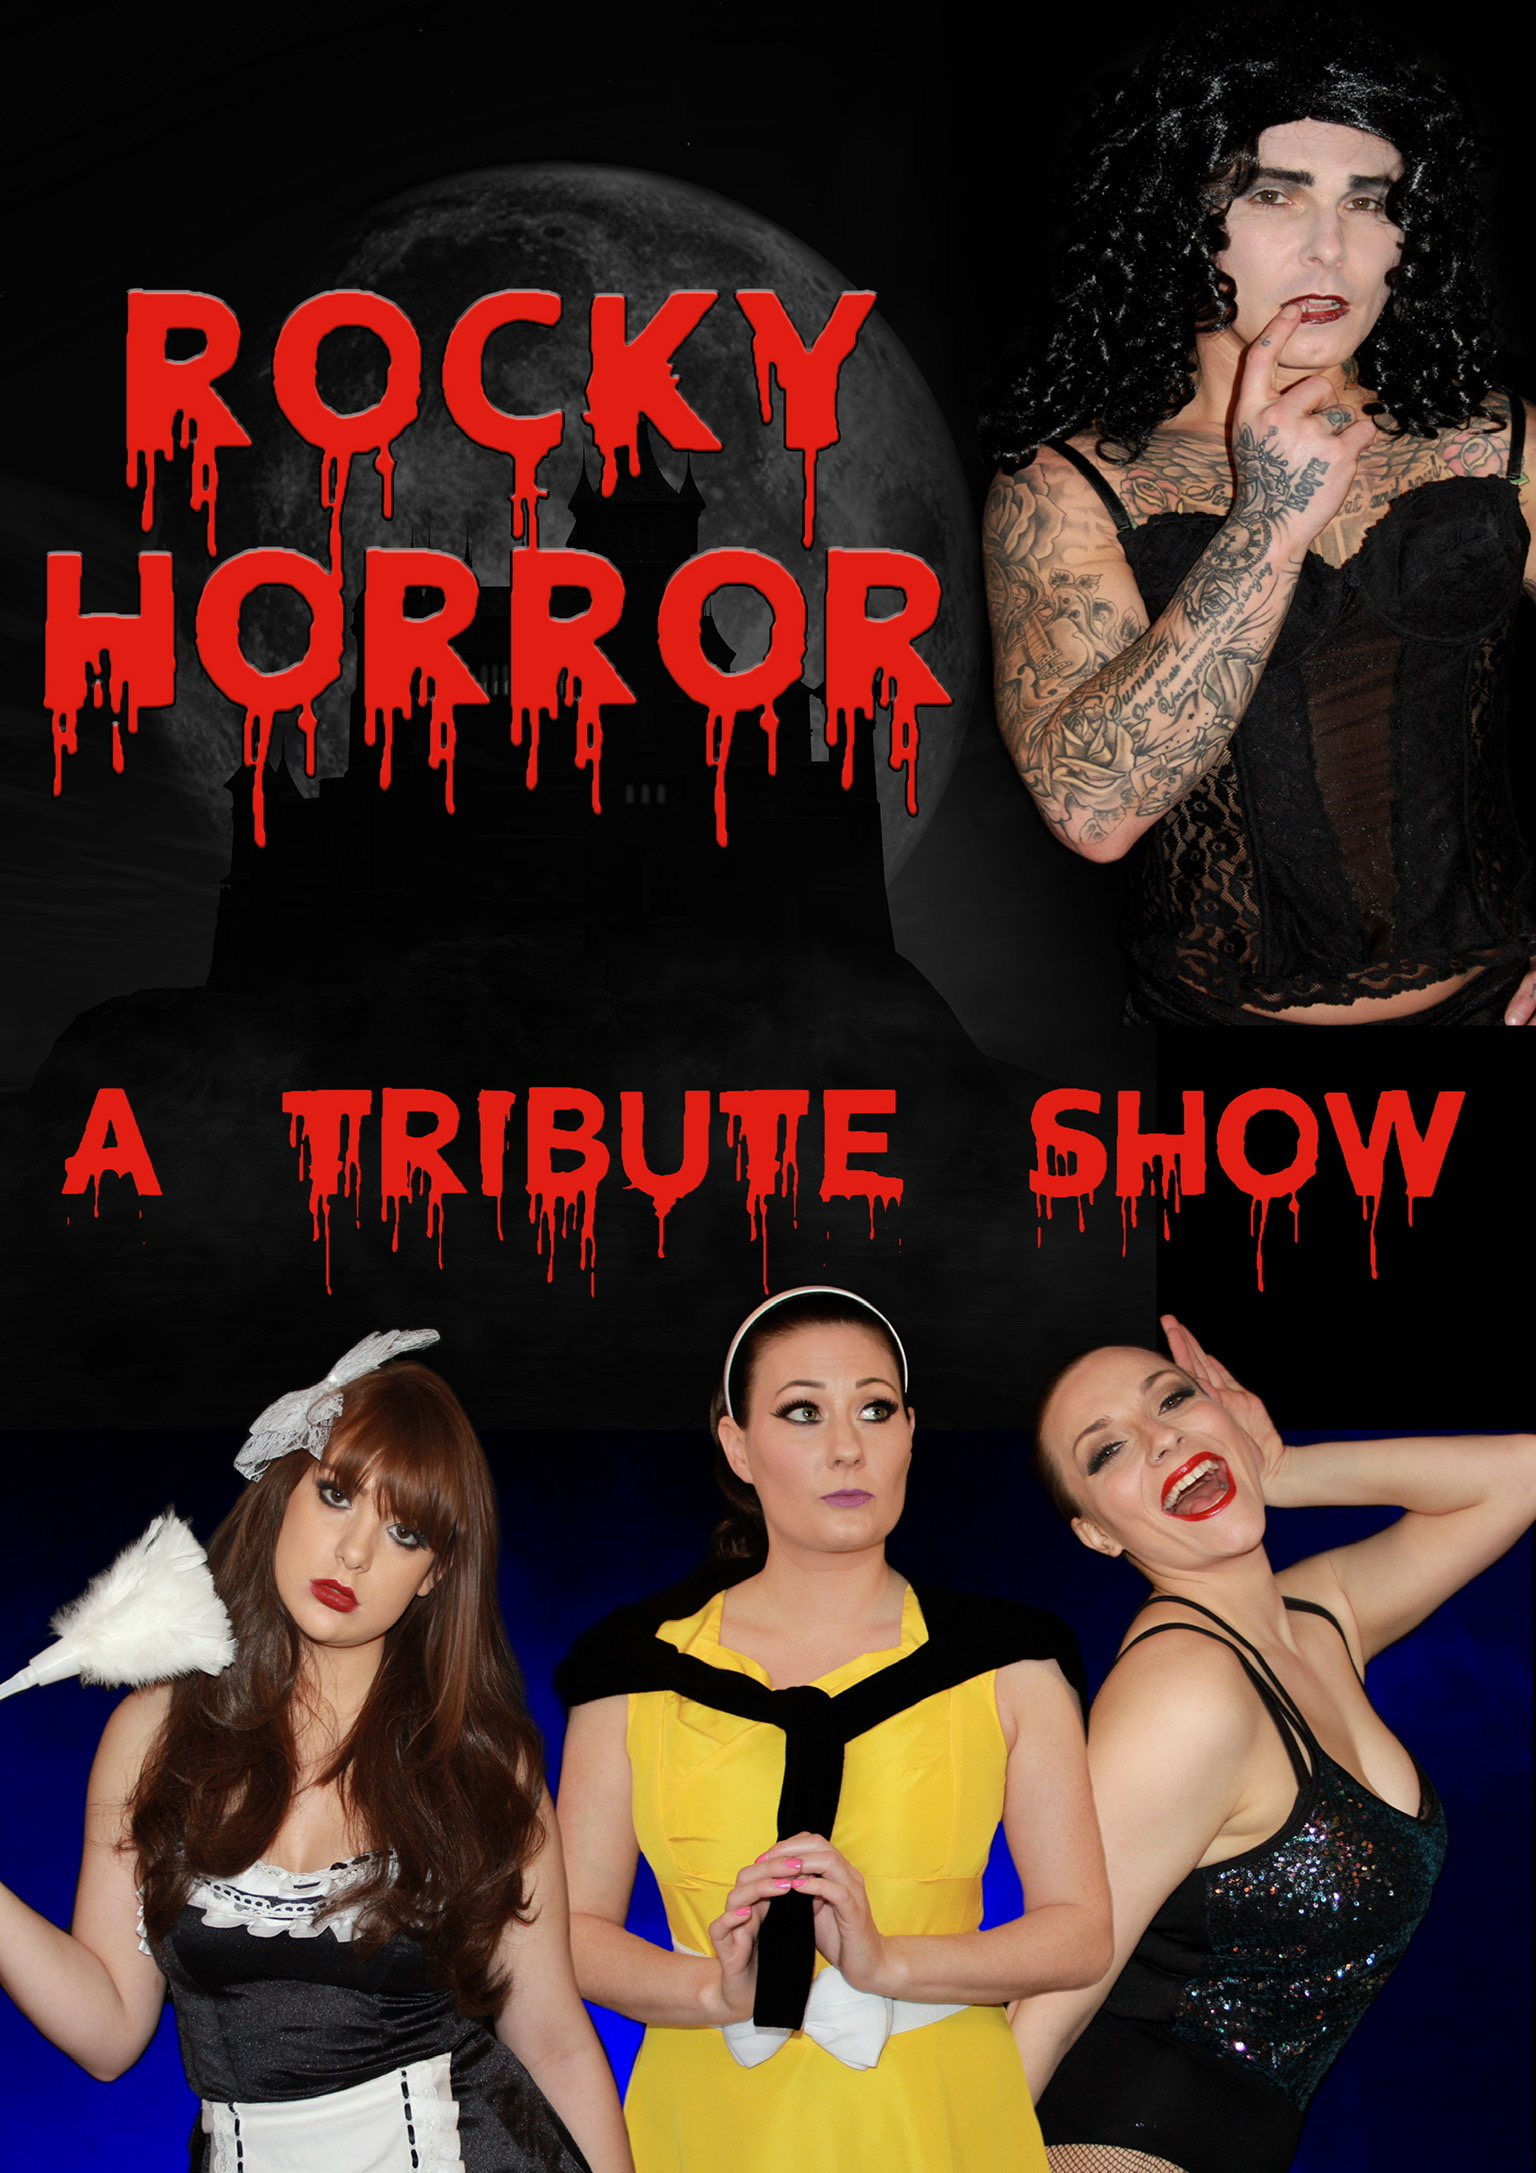 THE ROCKY HORROR EXPERIENCE - Oct 31st 2020